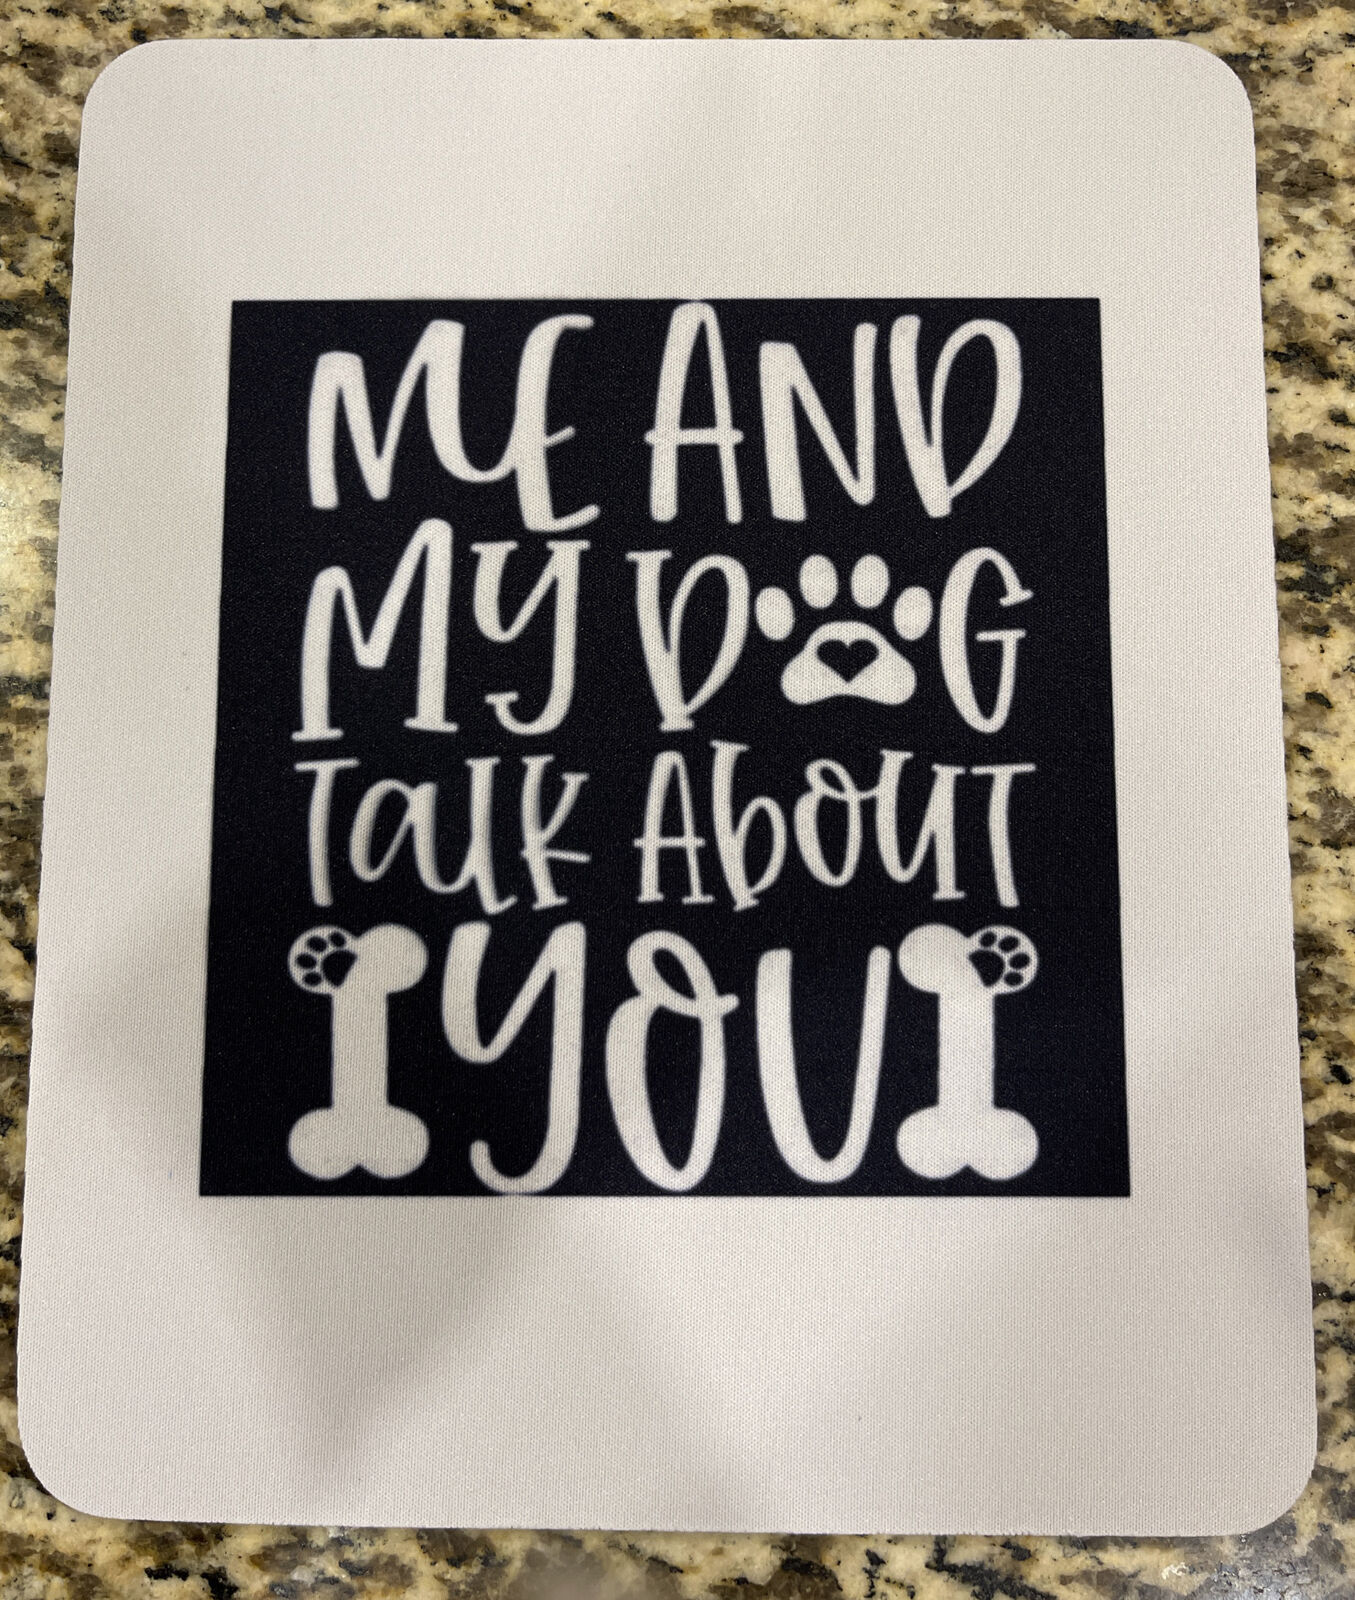 New Custom Printed Mouse Pad Me And My Dog Talk About You 🔥24x20x0.3CM